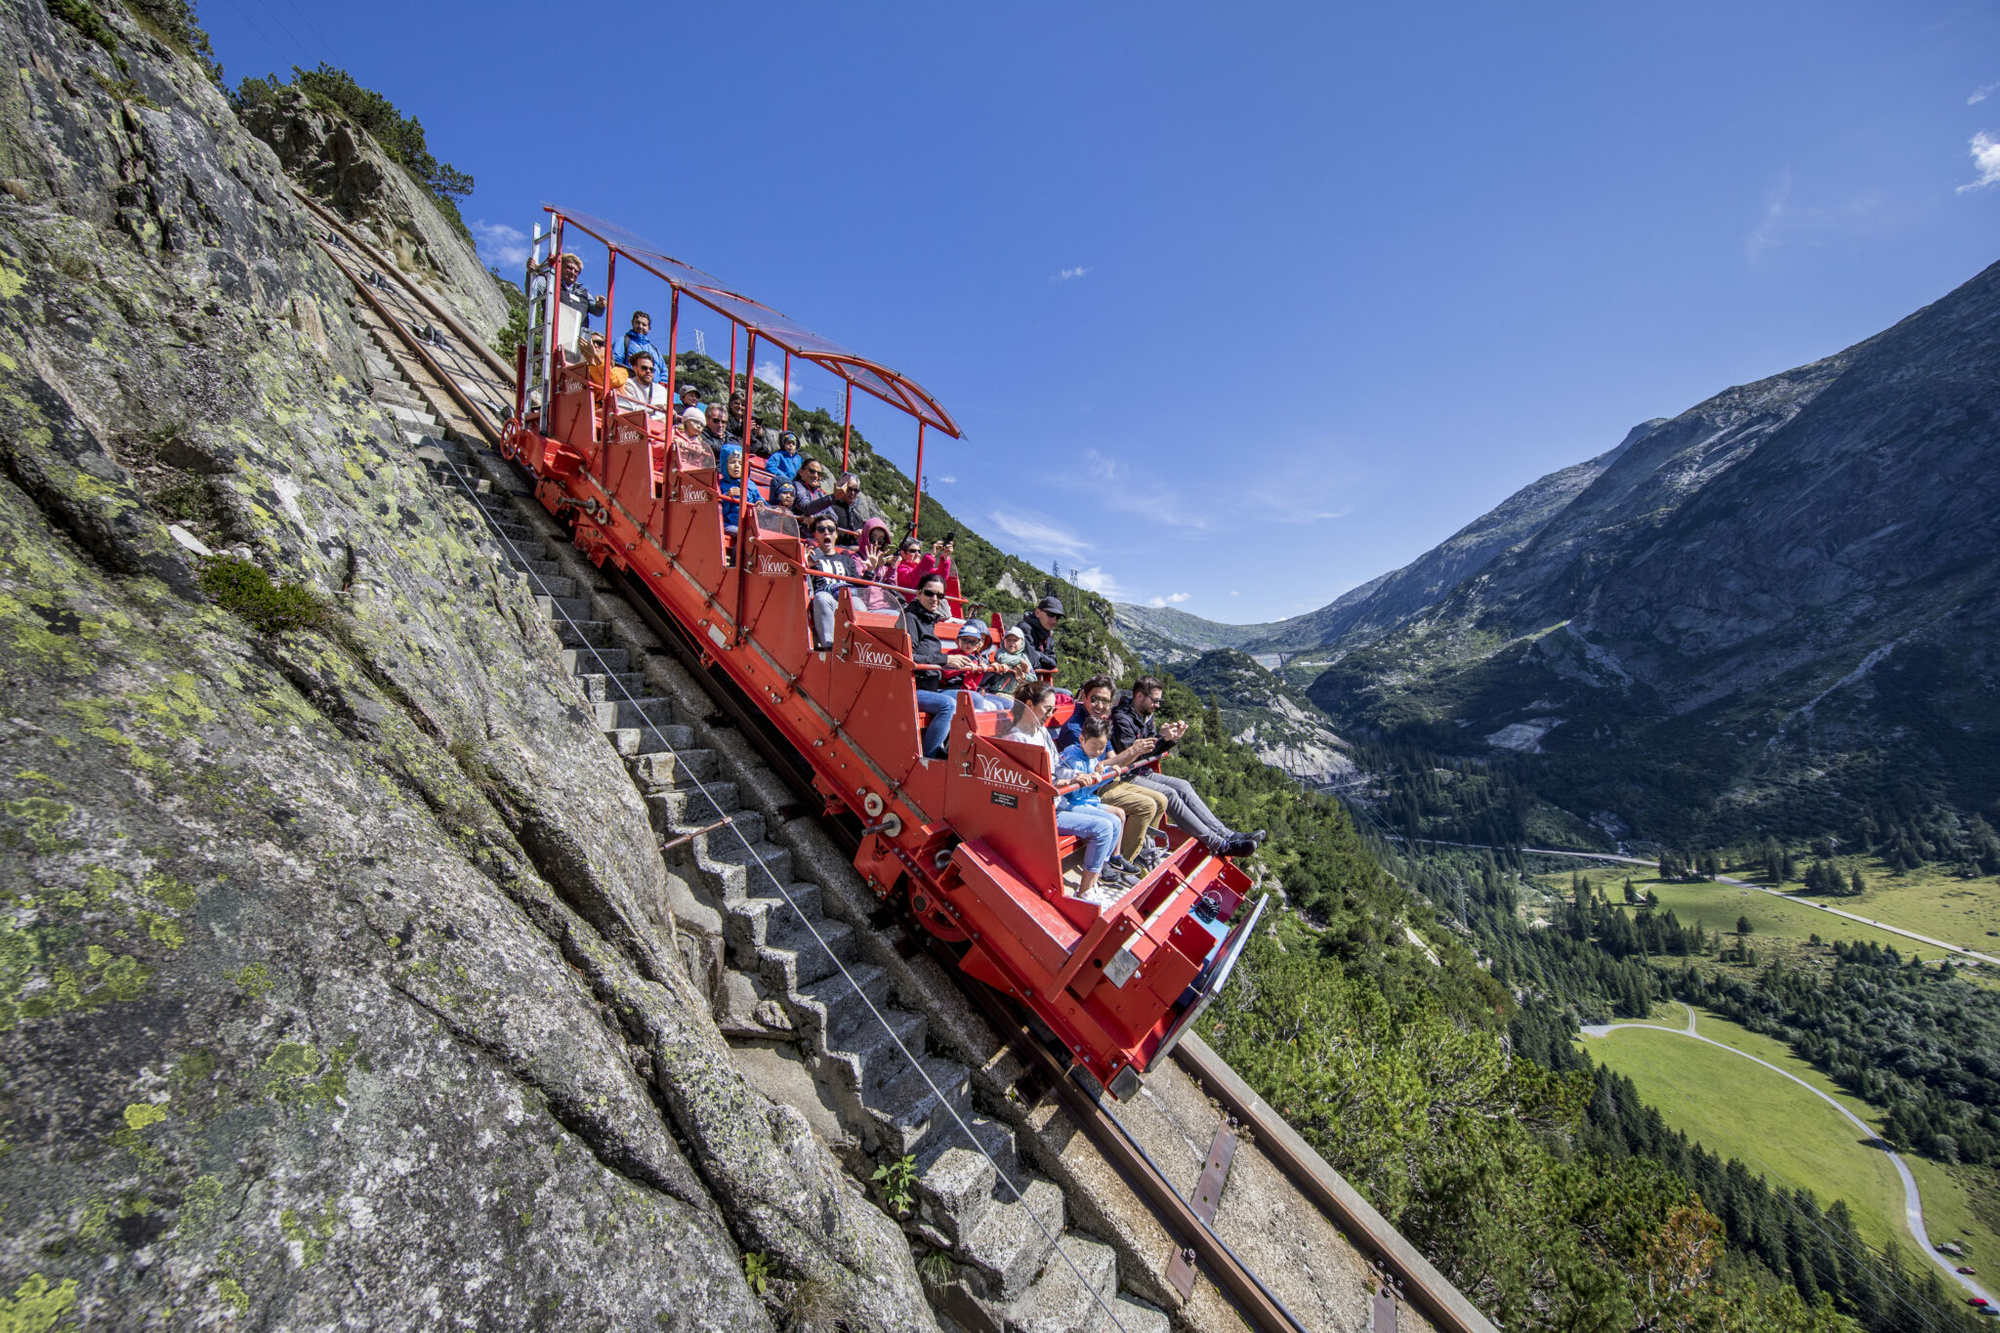 Attractions in Switzerland are breathtaking – image 7